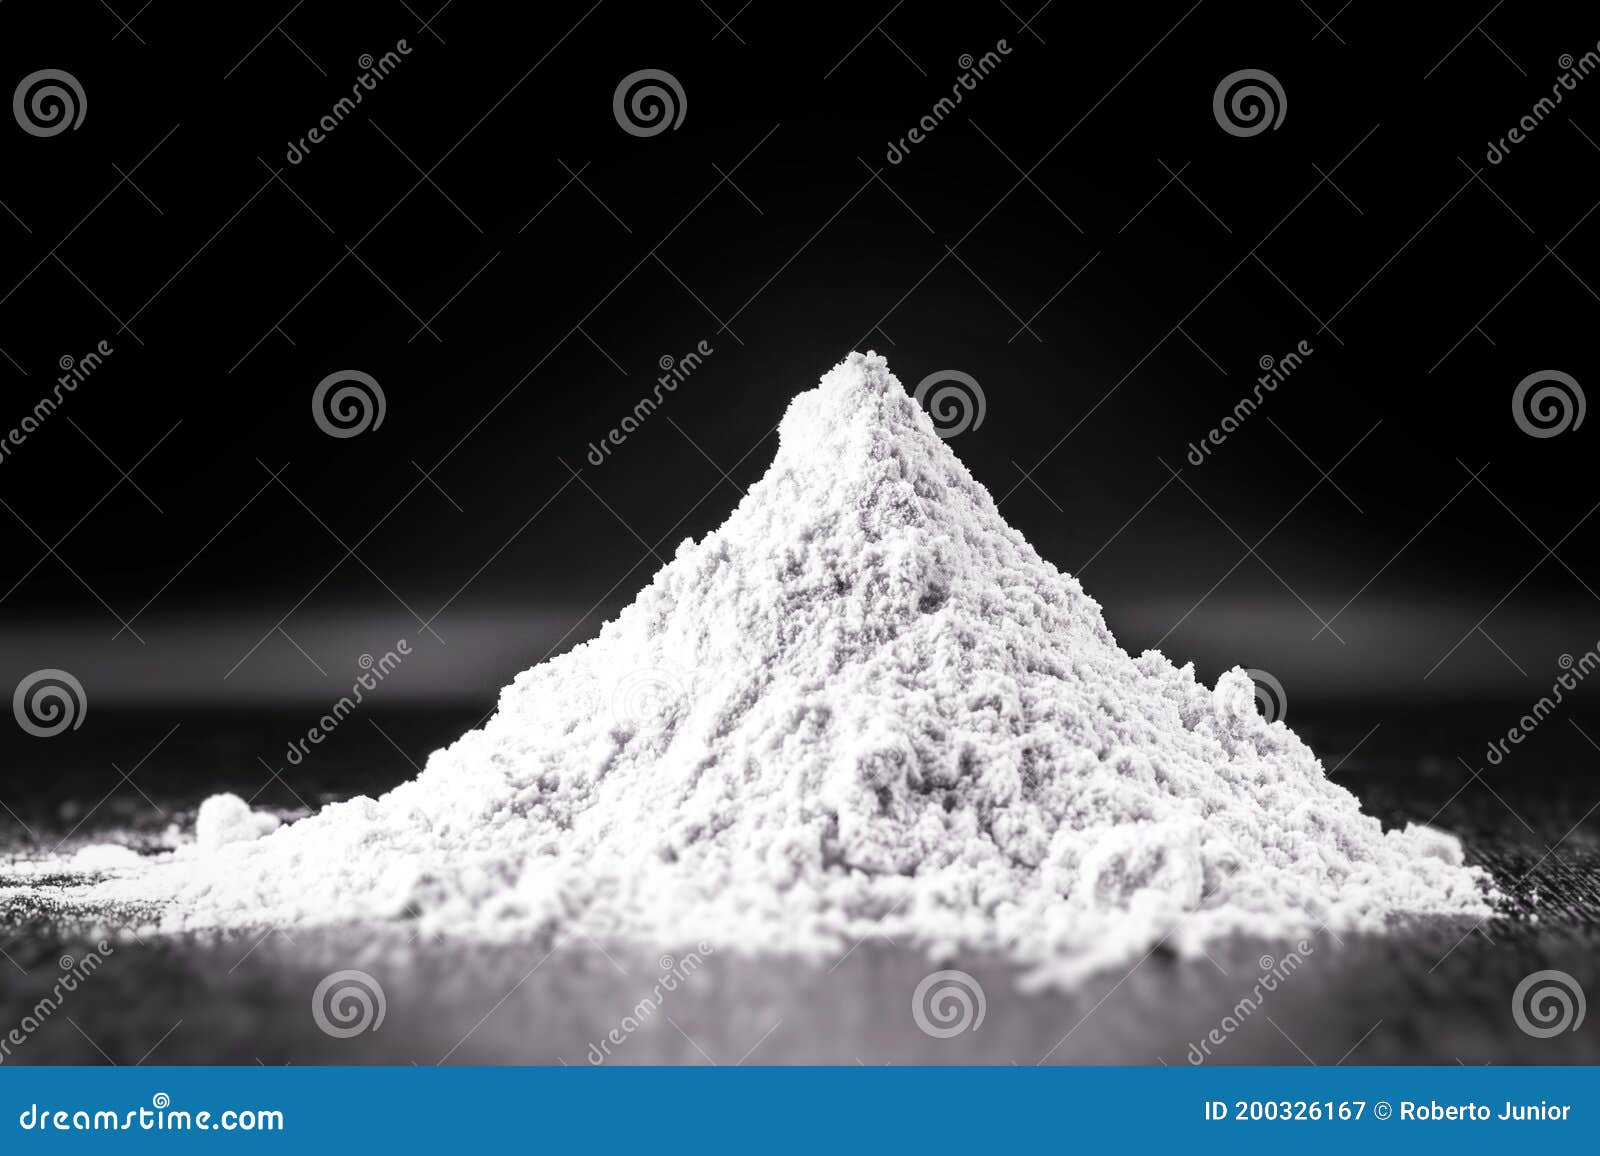 powdered dolomite. it is a mineral with a clay-like texture and is rich in calcium and magnesium. derived from limestone rocks, in